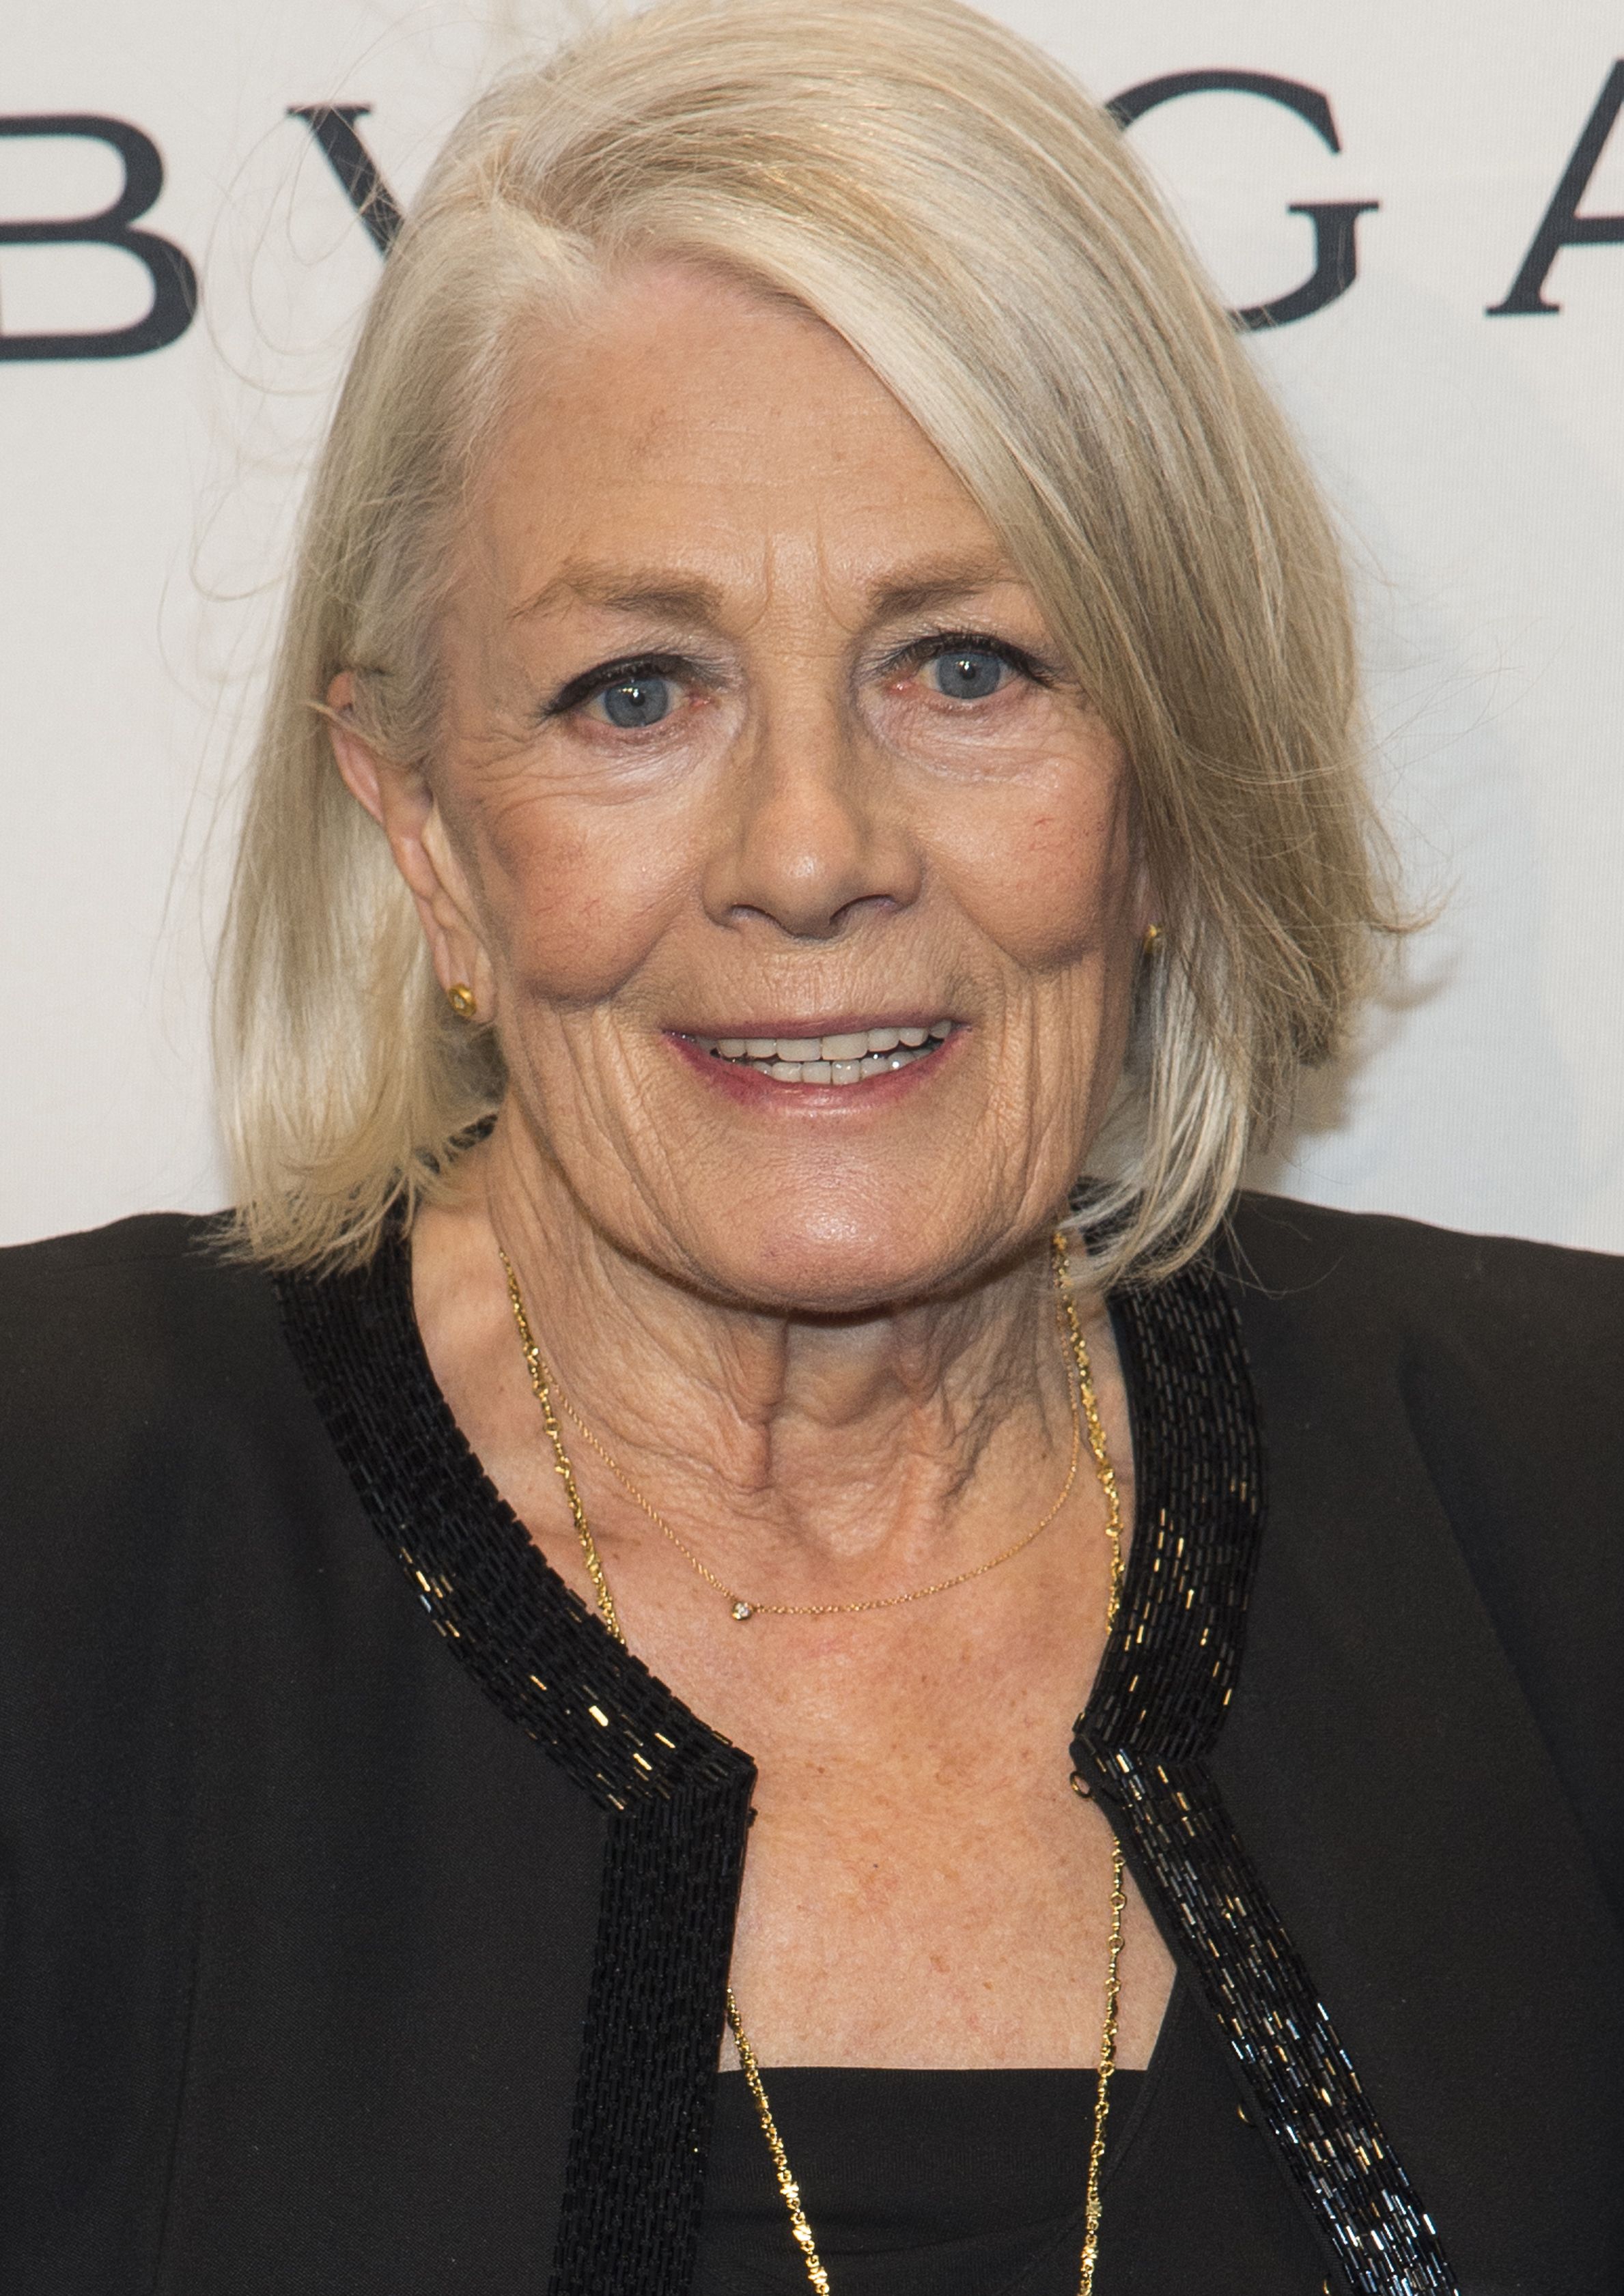 Vanessa Redgrave wears black with gold necklace.